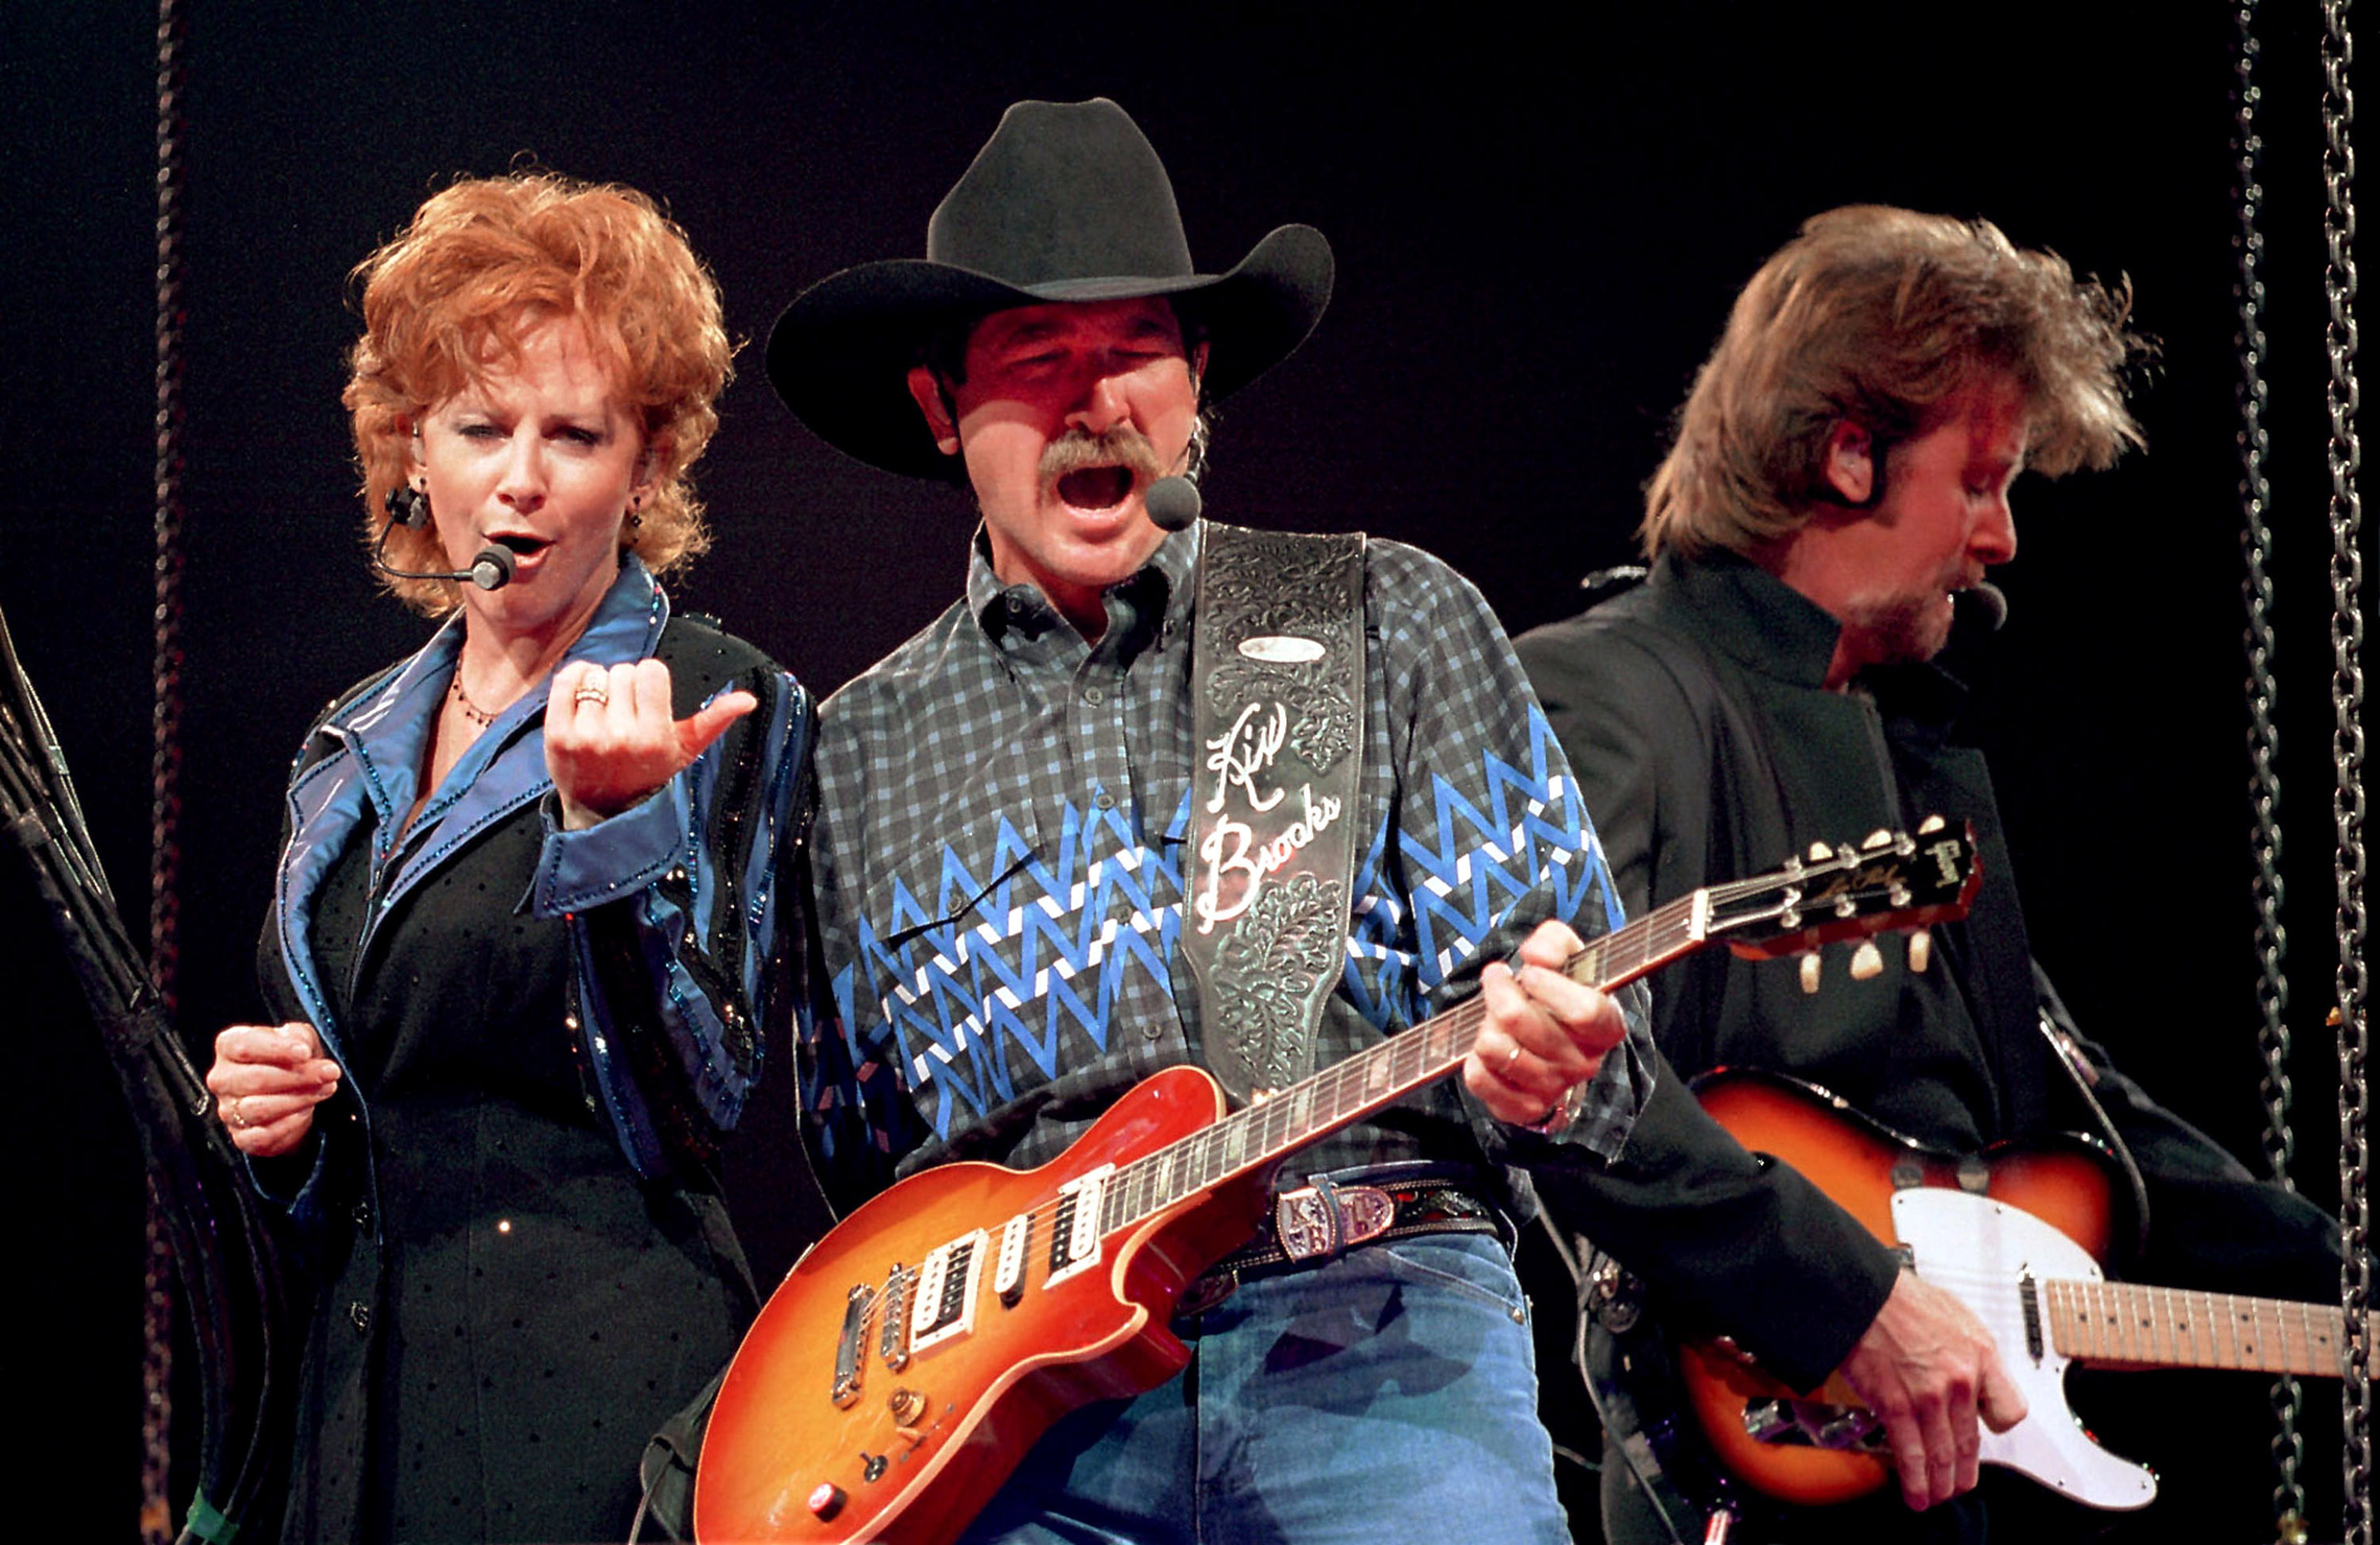 <p>Bringing together three '90s country powerhouses, "If You See Her/If You See Him," is a quintessential break-up song. Released in 1998, the song was an instant hit, reaching #1 on what is now the Billboard Hot Country Songs chart. </p><p>You may also like: <a href='https://www.yardbarker.com/entertainment/articles/the_best_fictional_films_from_real_films/s1__33080750'>The best fictional films from real films</a></p>